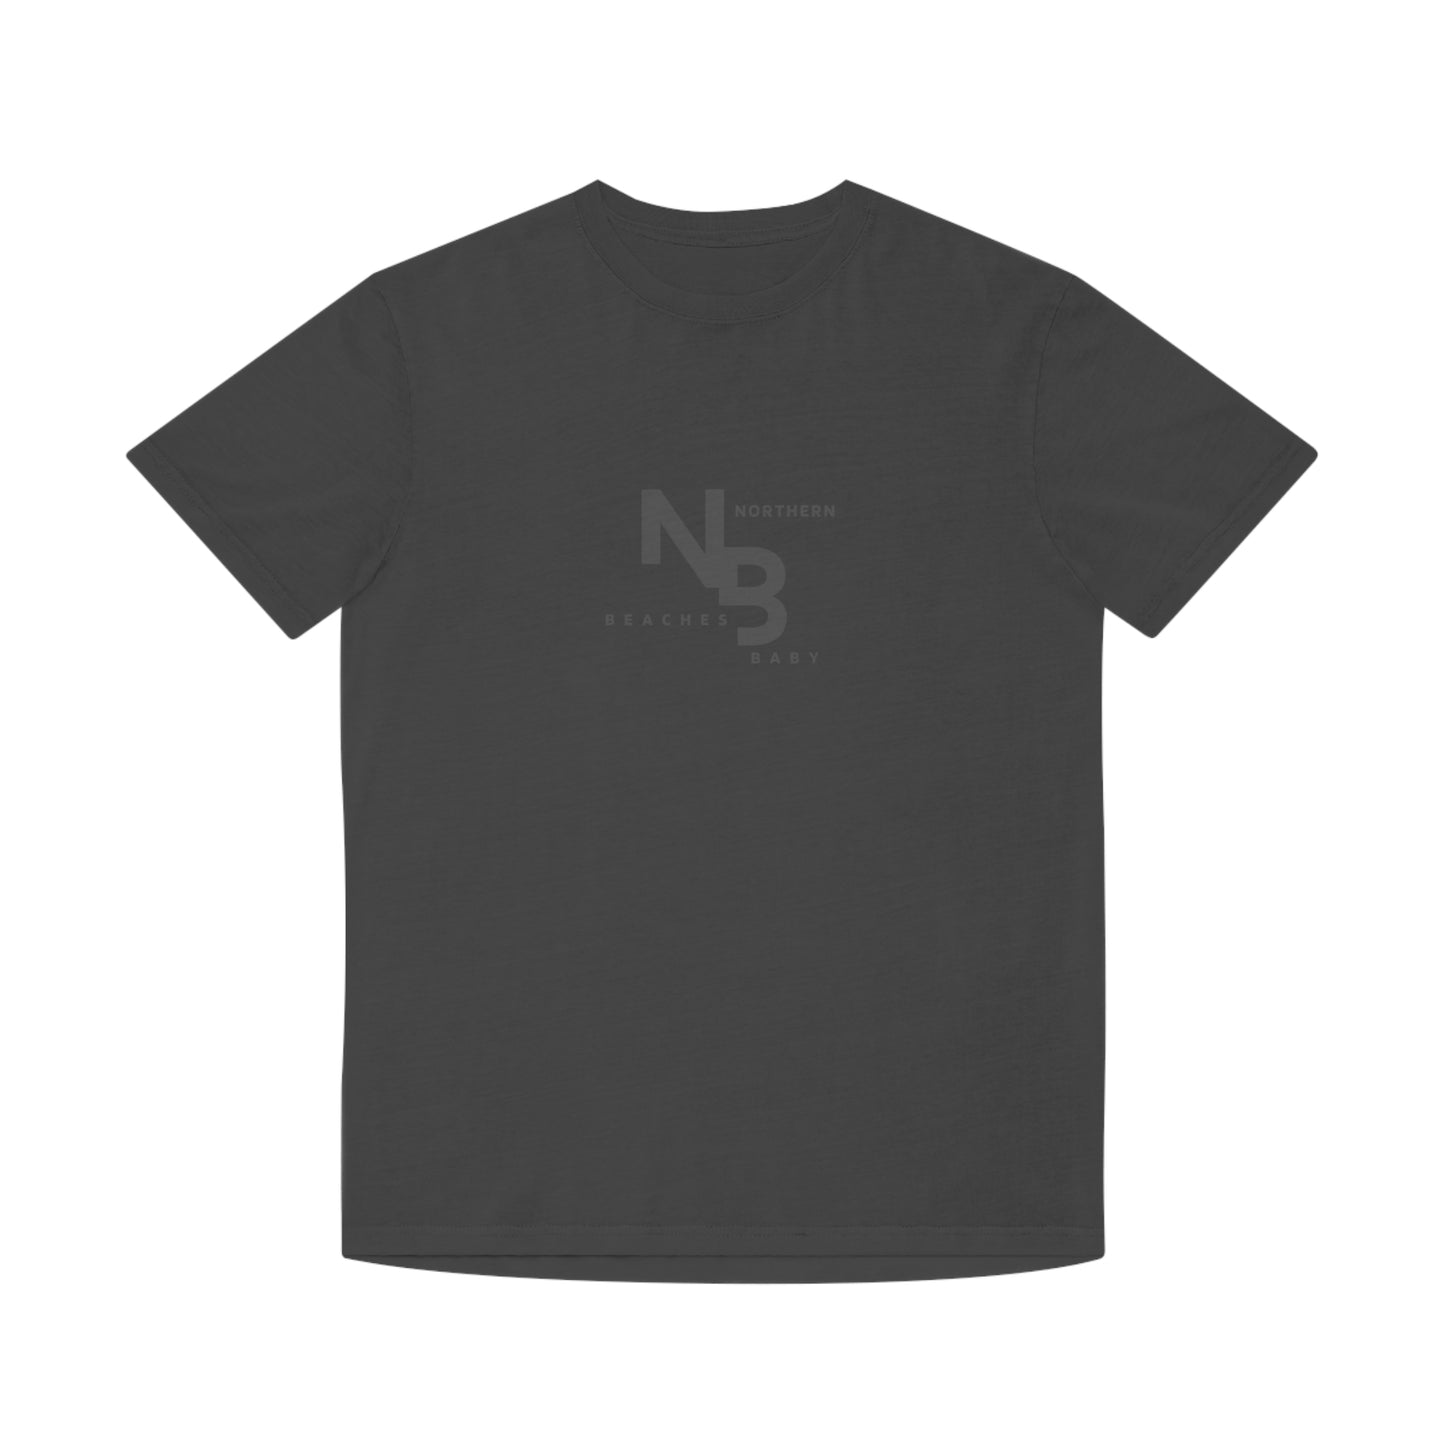 Faded Cotton T-Shirt Northern Beaches Baby